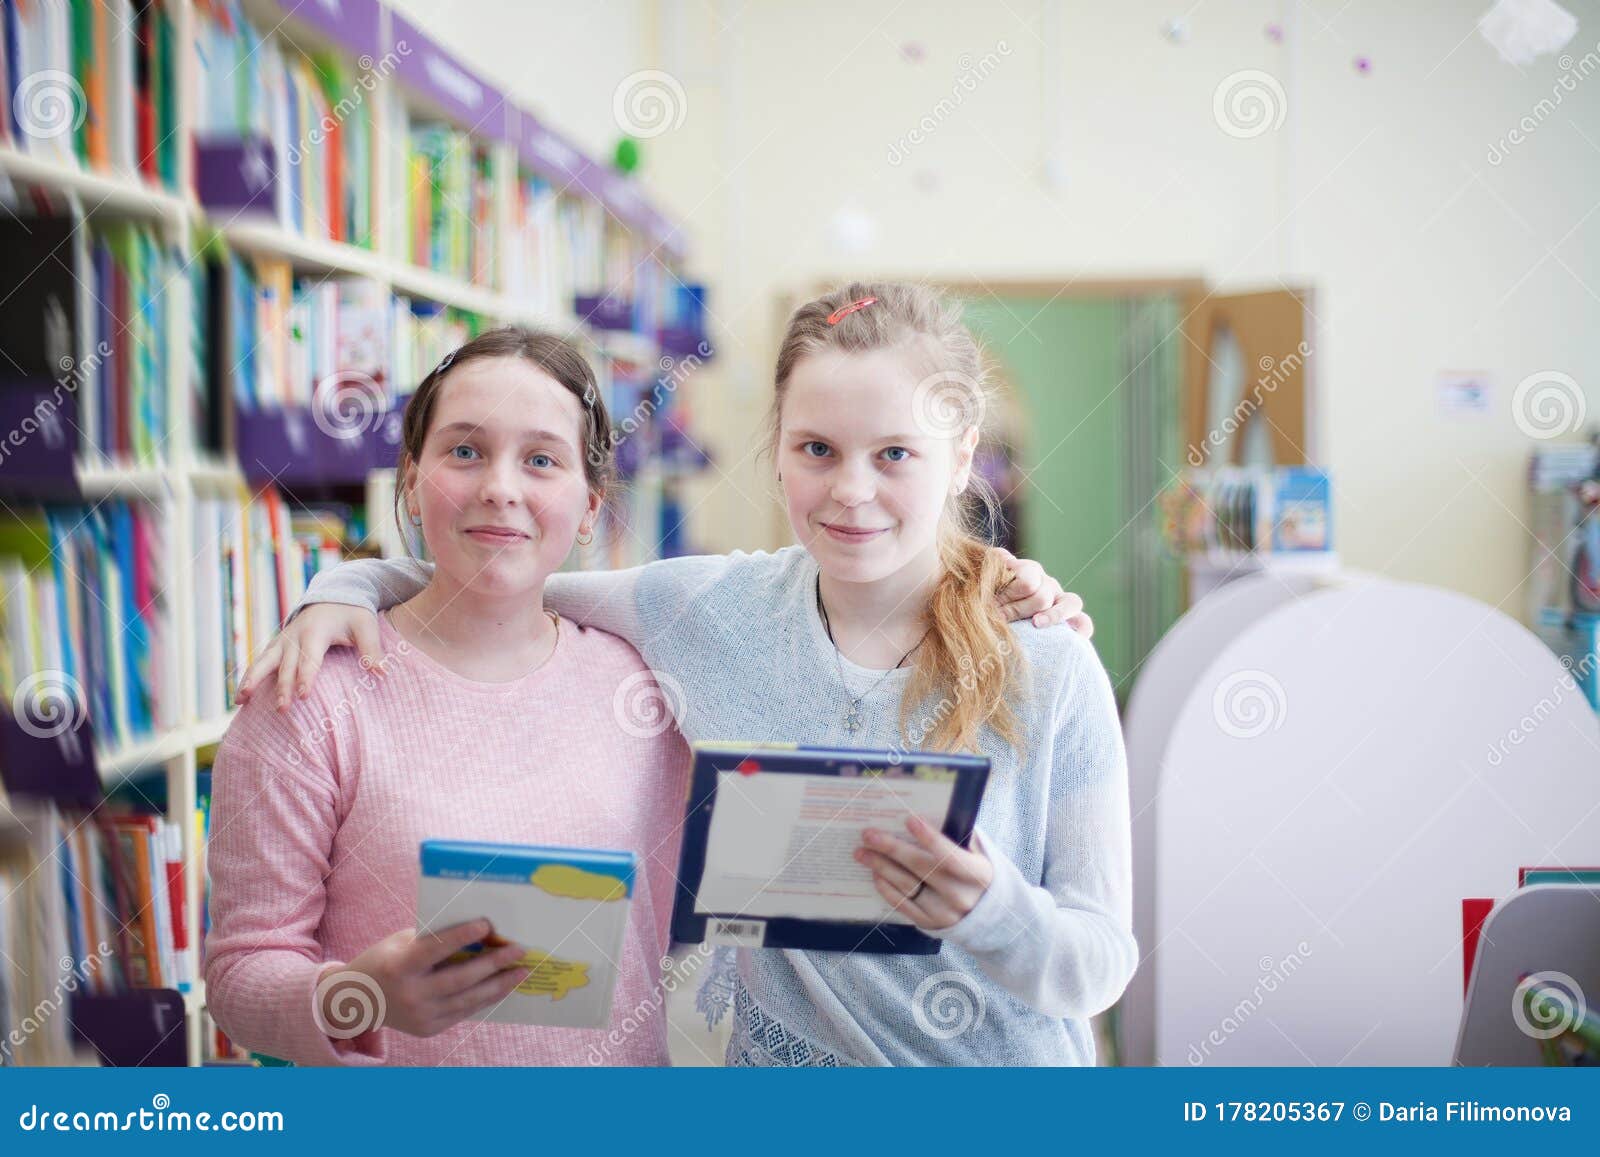 Girls Choosing Book In Library Stock Image Image Of Library Together